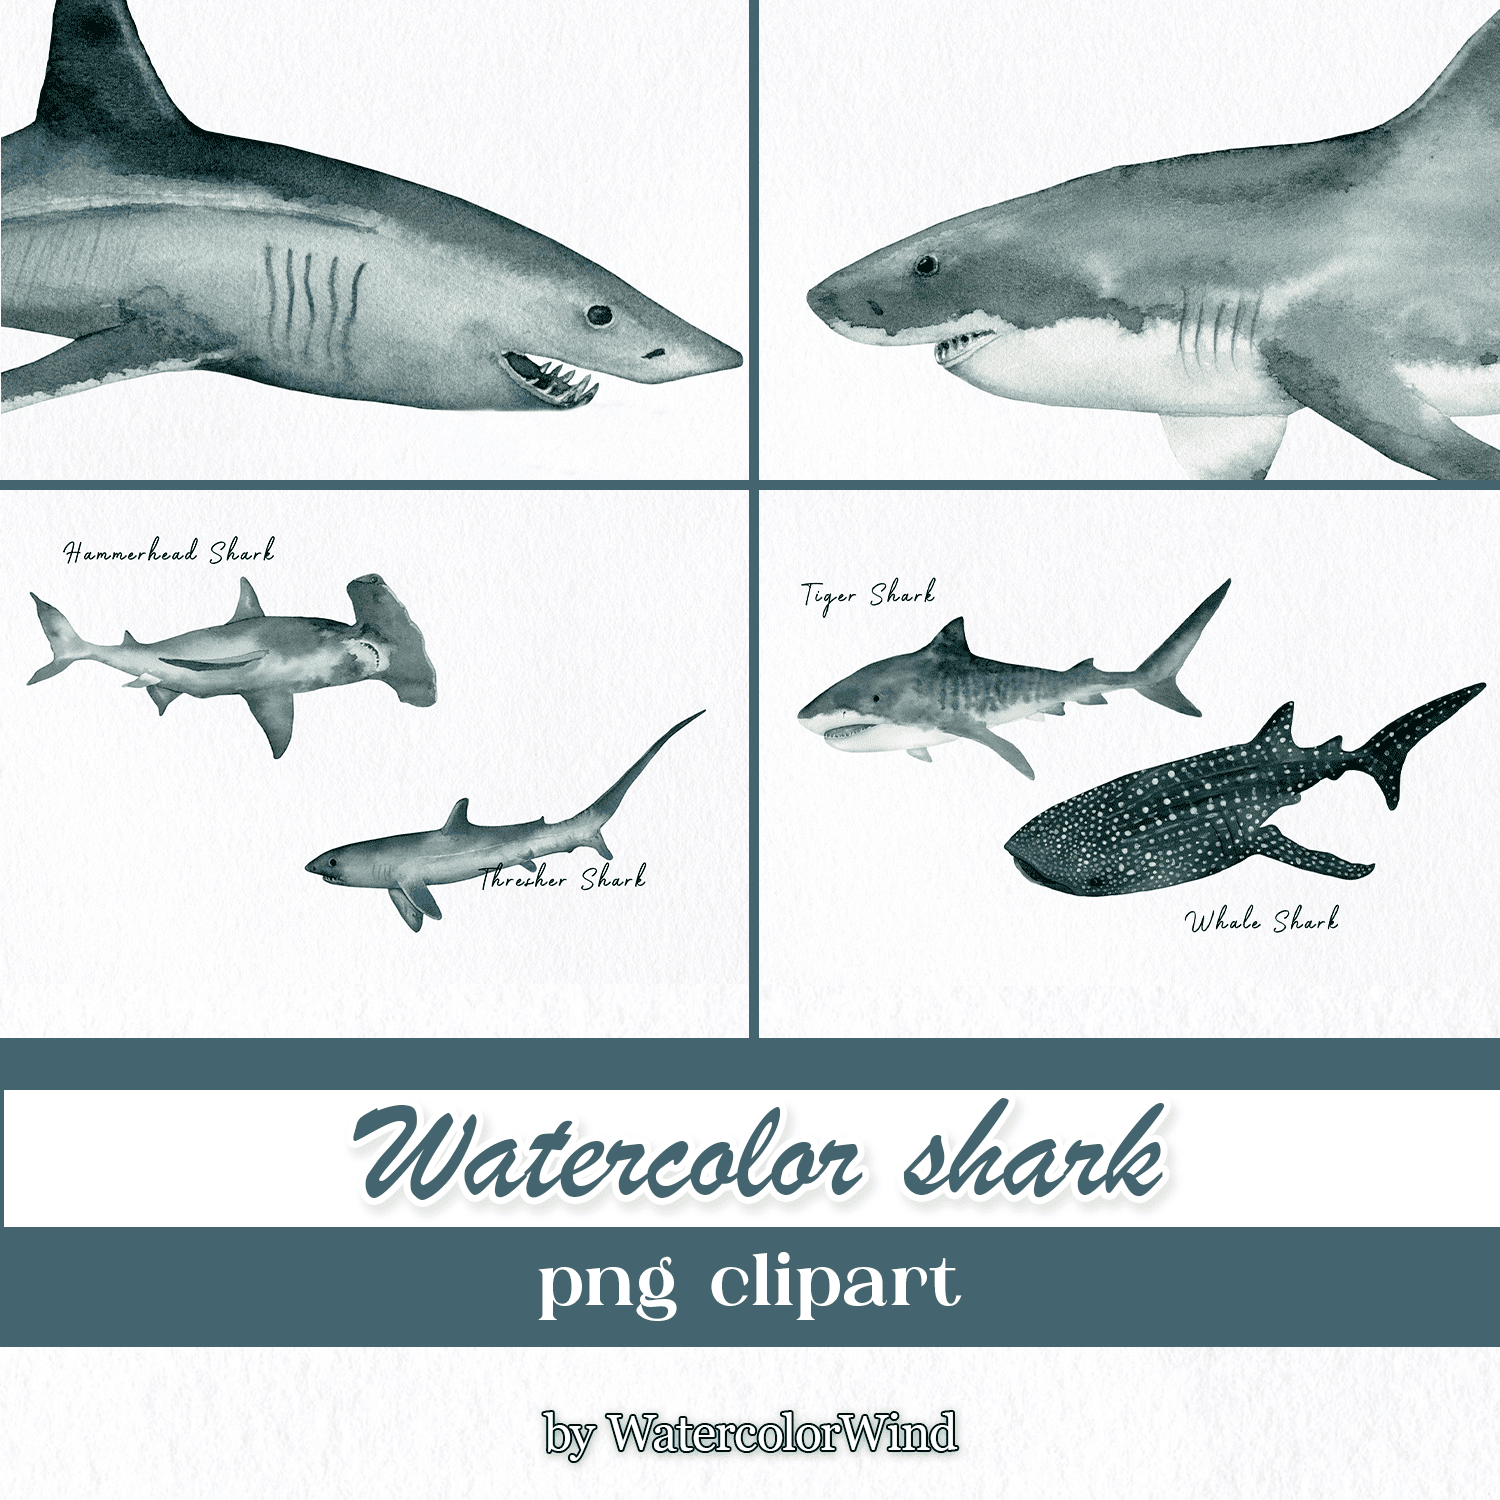 Watercolor shark png clipart cover.